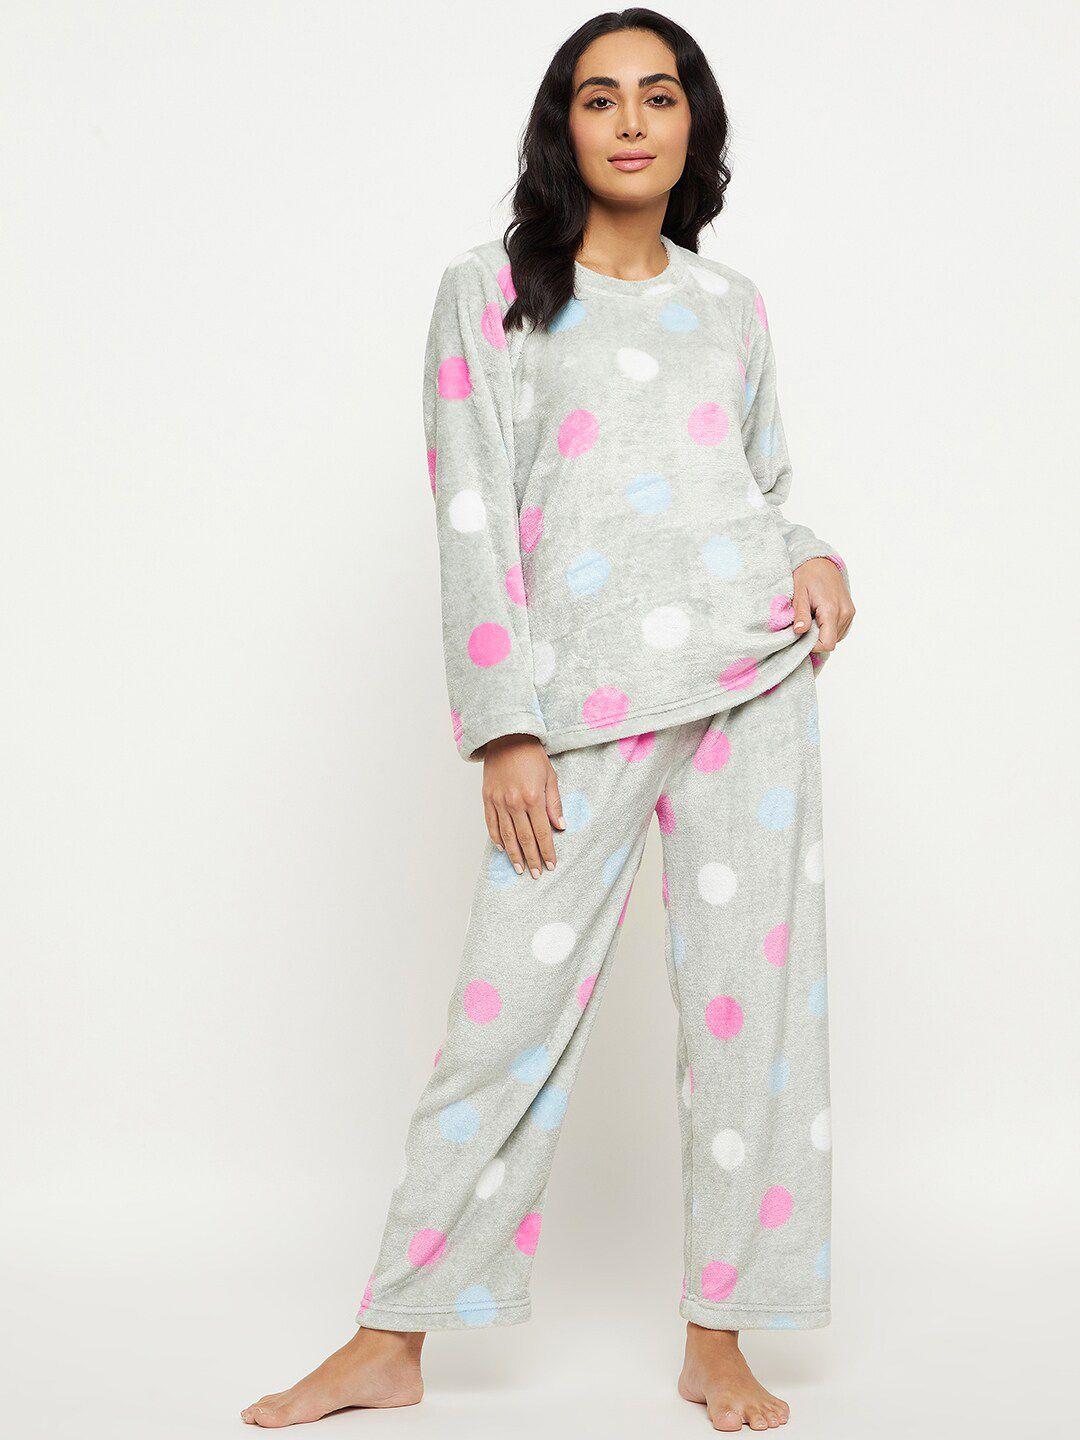 camey polka dots printed night suit